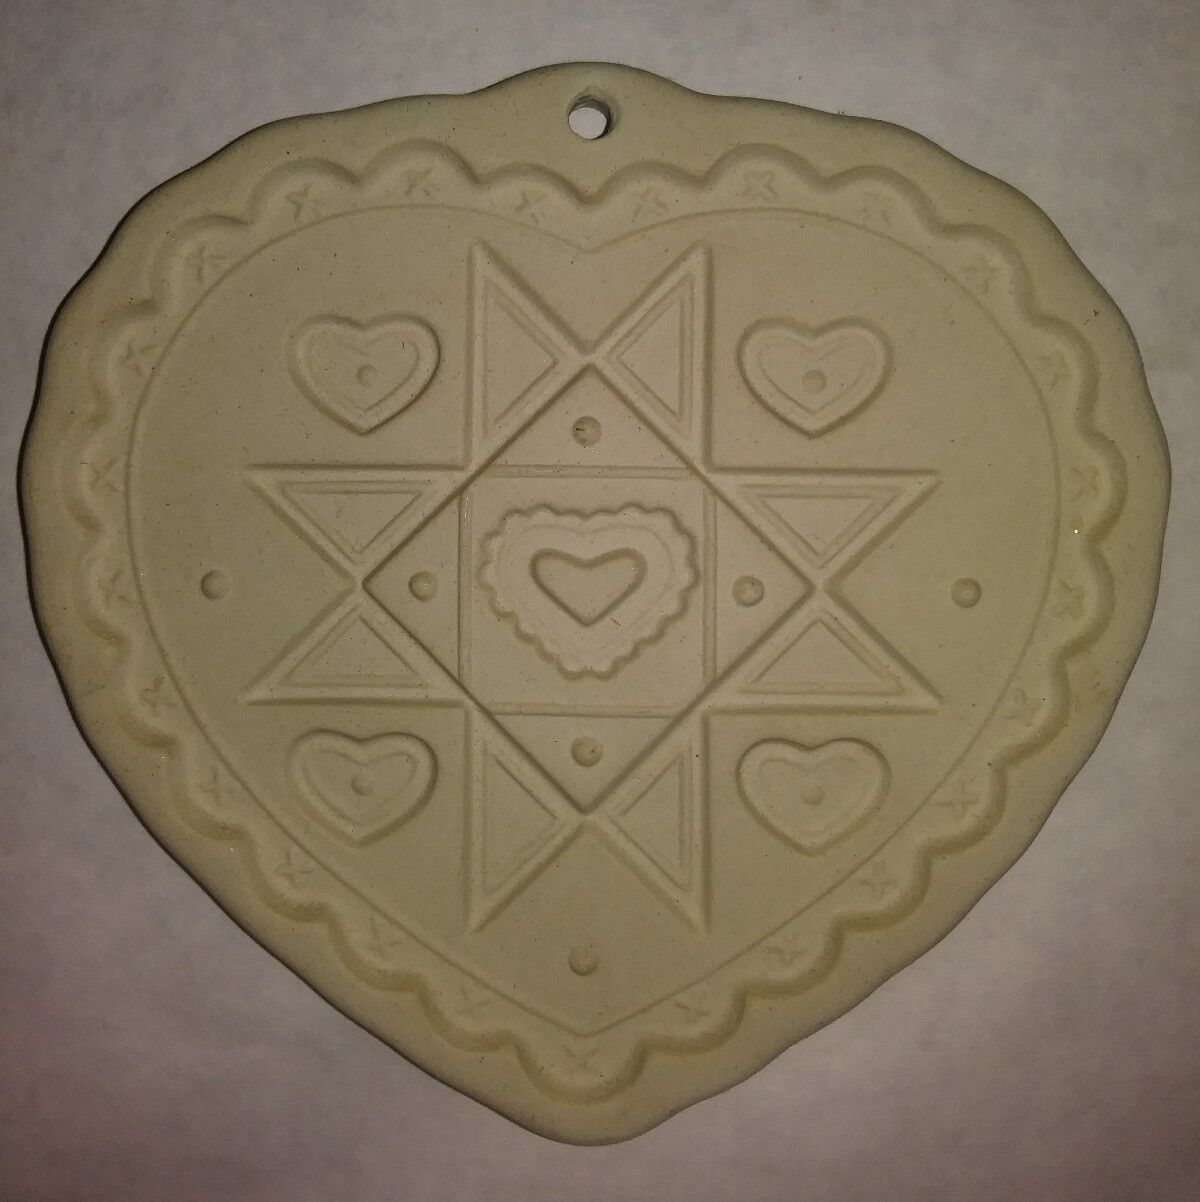 Pampered Chef Cookie Mold Homespun Heart Collectible Stoneware 1993 Vitg Decor